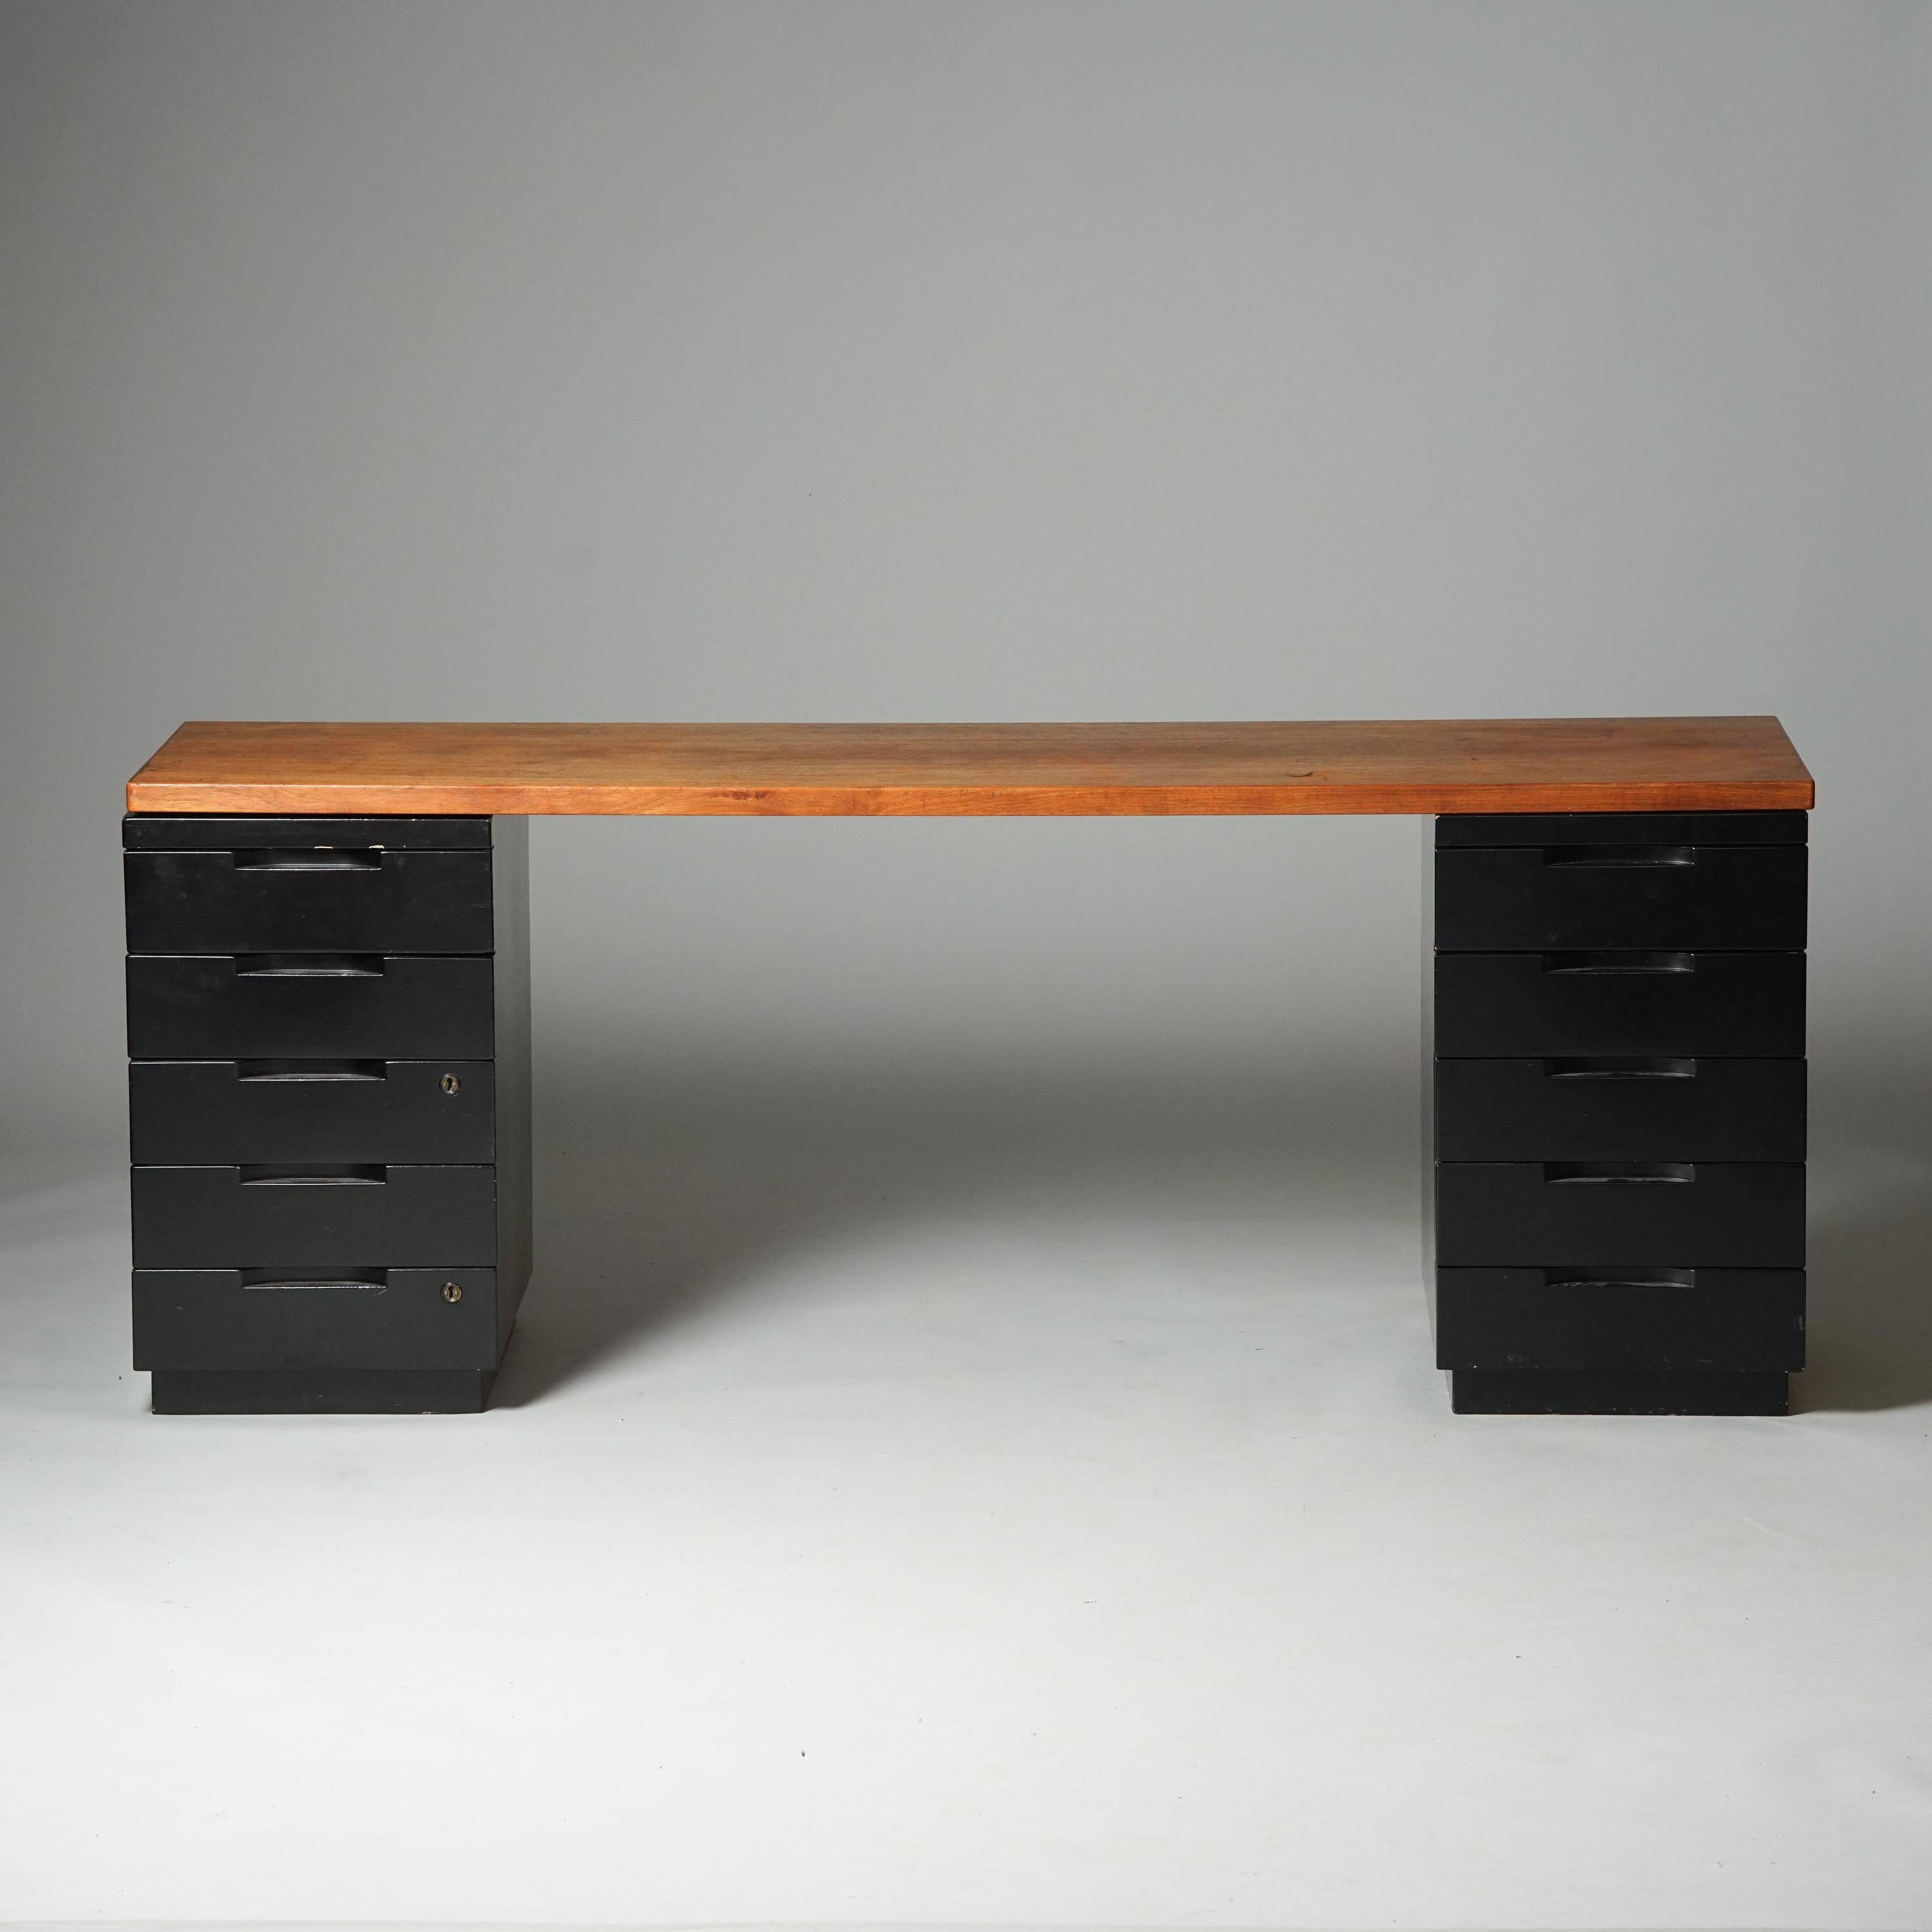 Desk, design Alvar Aalto, manufactured by Artek, 1950/1960s. Teak table top with painted wood drawers. Good vintage condition, patina and wear consistent with age and use. 

Alvar Aalto (1898-1976) is probably the most famous Finnish architect and